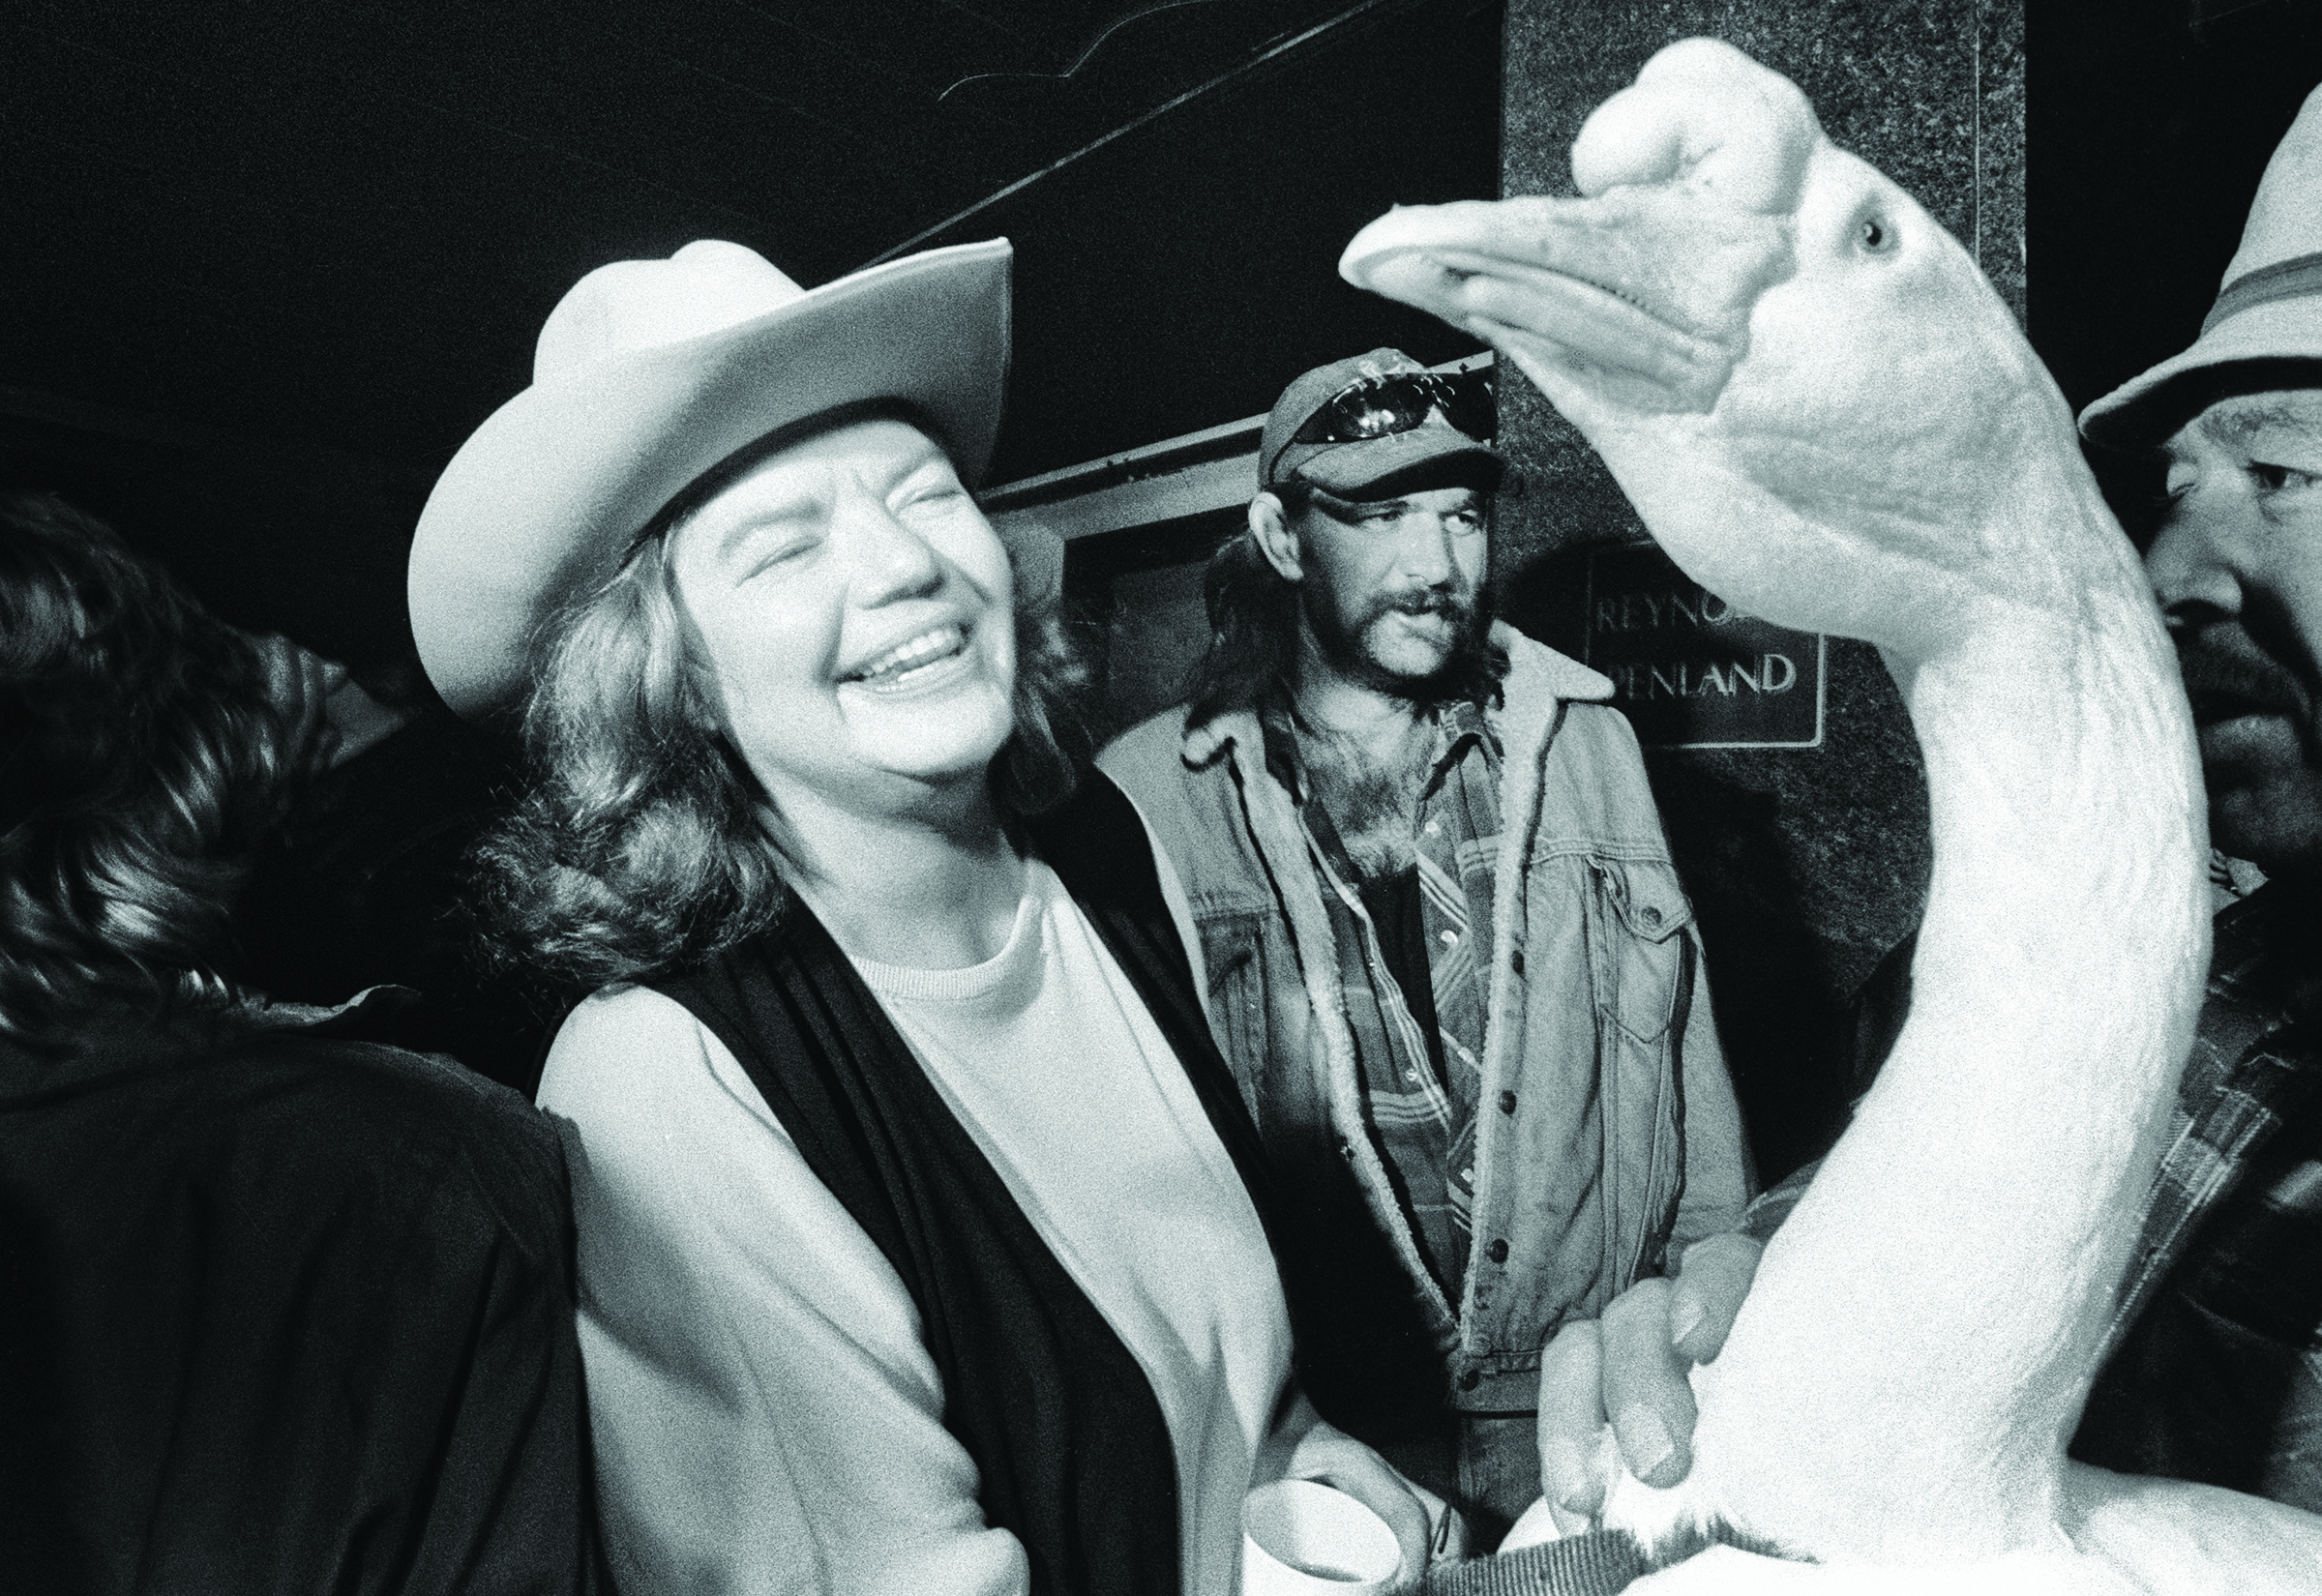 Former Texas Observer editor Molly Ivins, who camped out in protest of Austin’s camping ban in 1996, greets Homer the Homeless Goose, a waterfowl who played a key role in the protests of the Street People’s Advisory Committee.